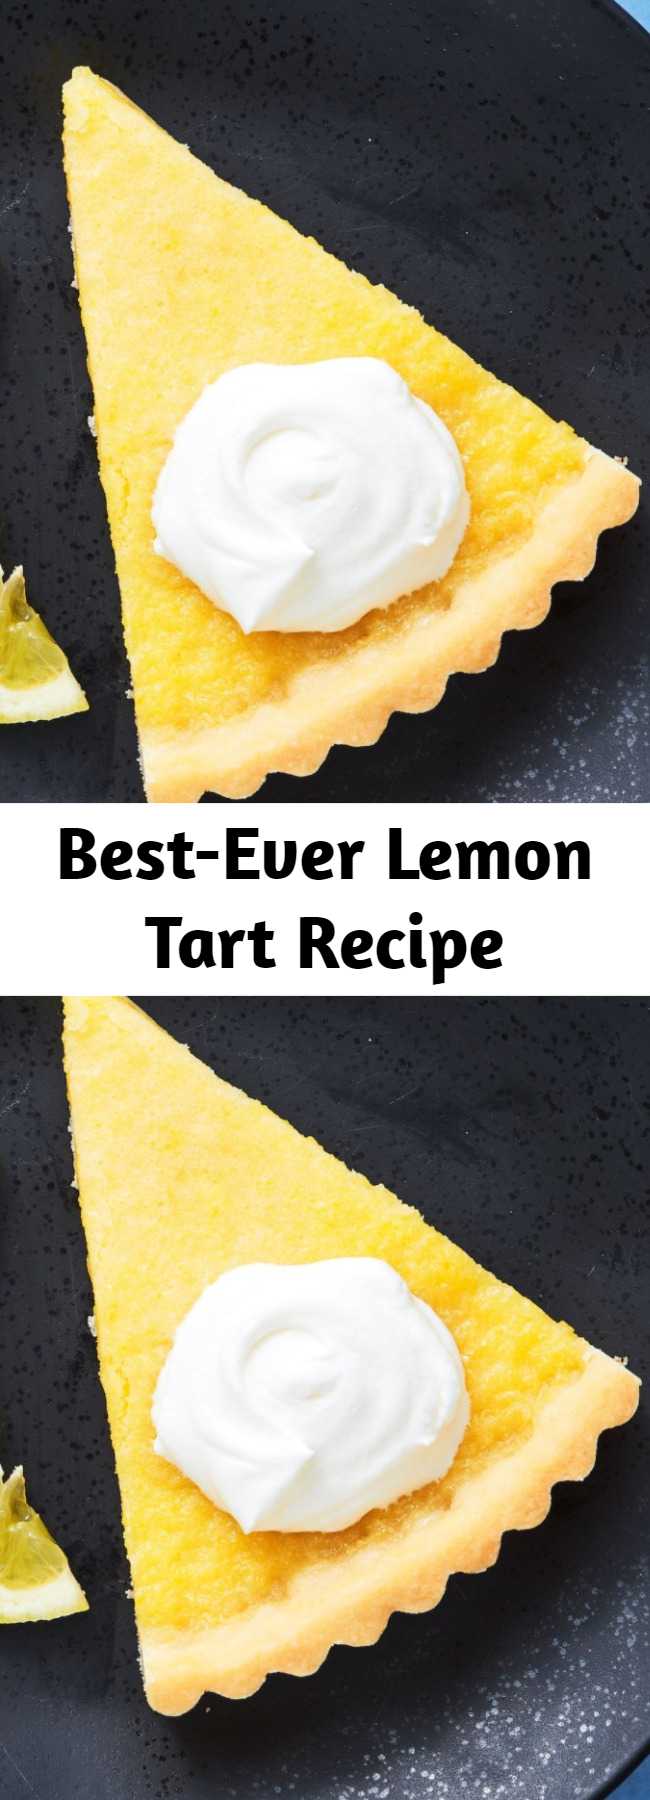 Best-Ever Lemon Tart Recipe - This impressive tart is surprisingly easy to make. We love serving it with a big dollop of homemade whipped cream.